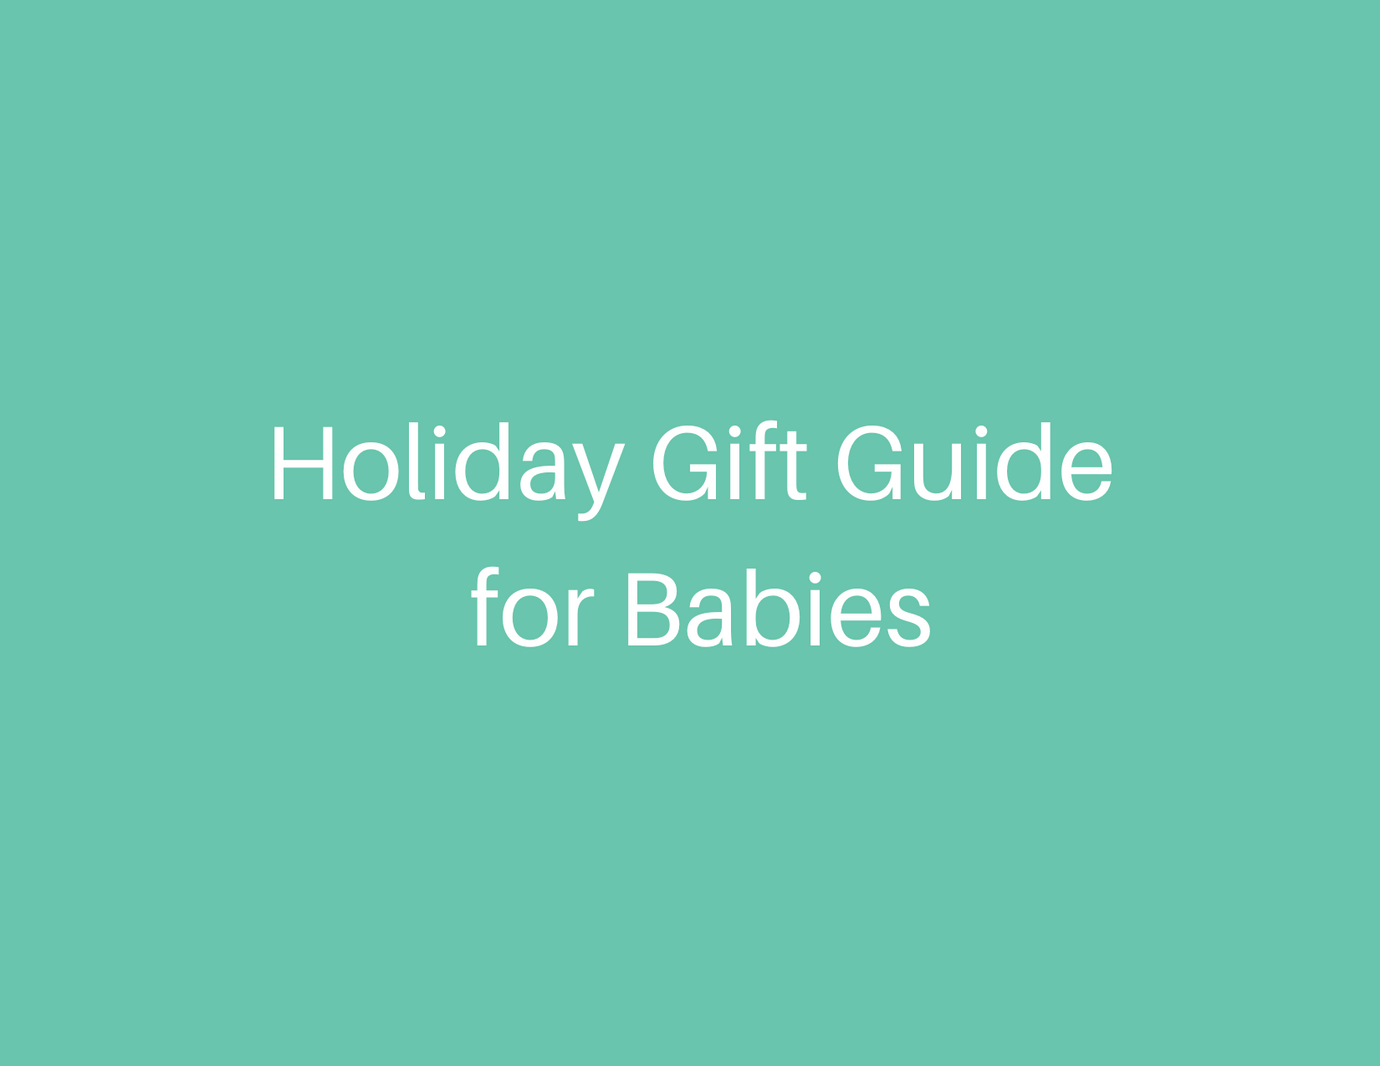 Holiday Gift Guide for Babies